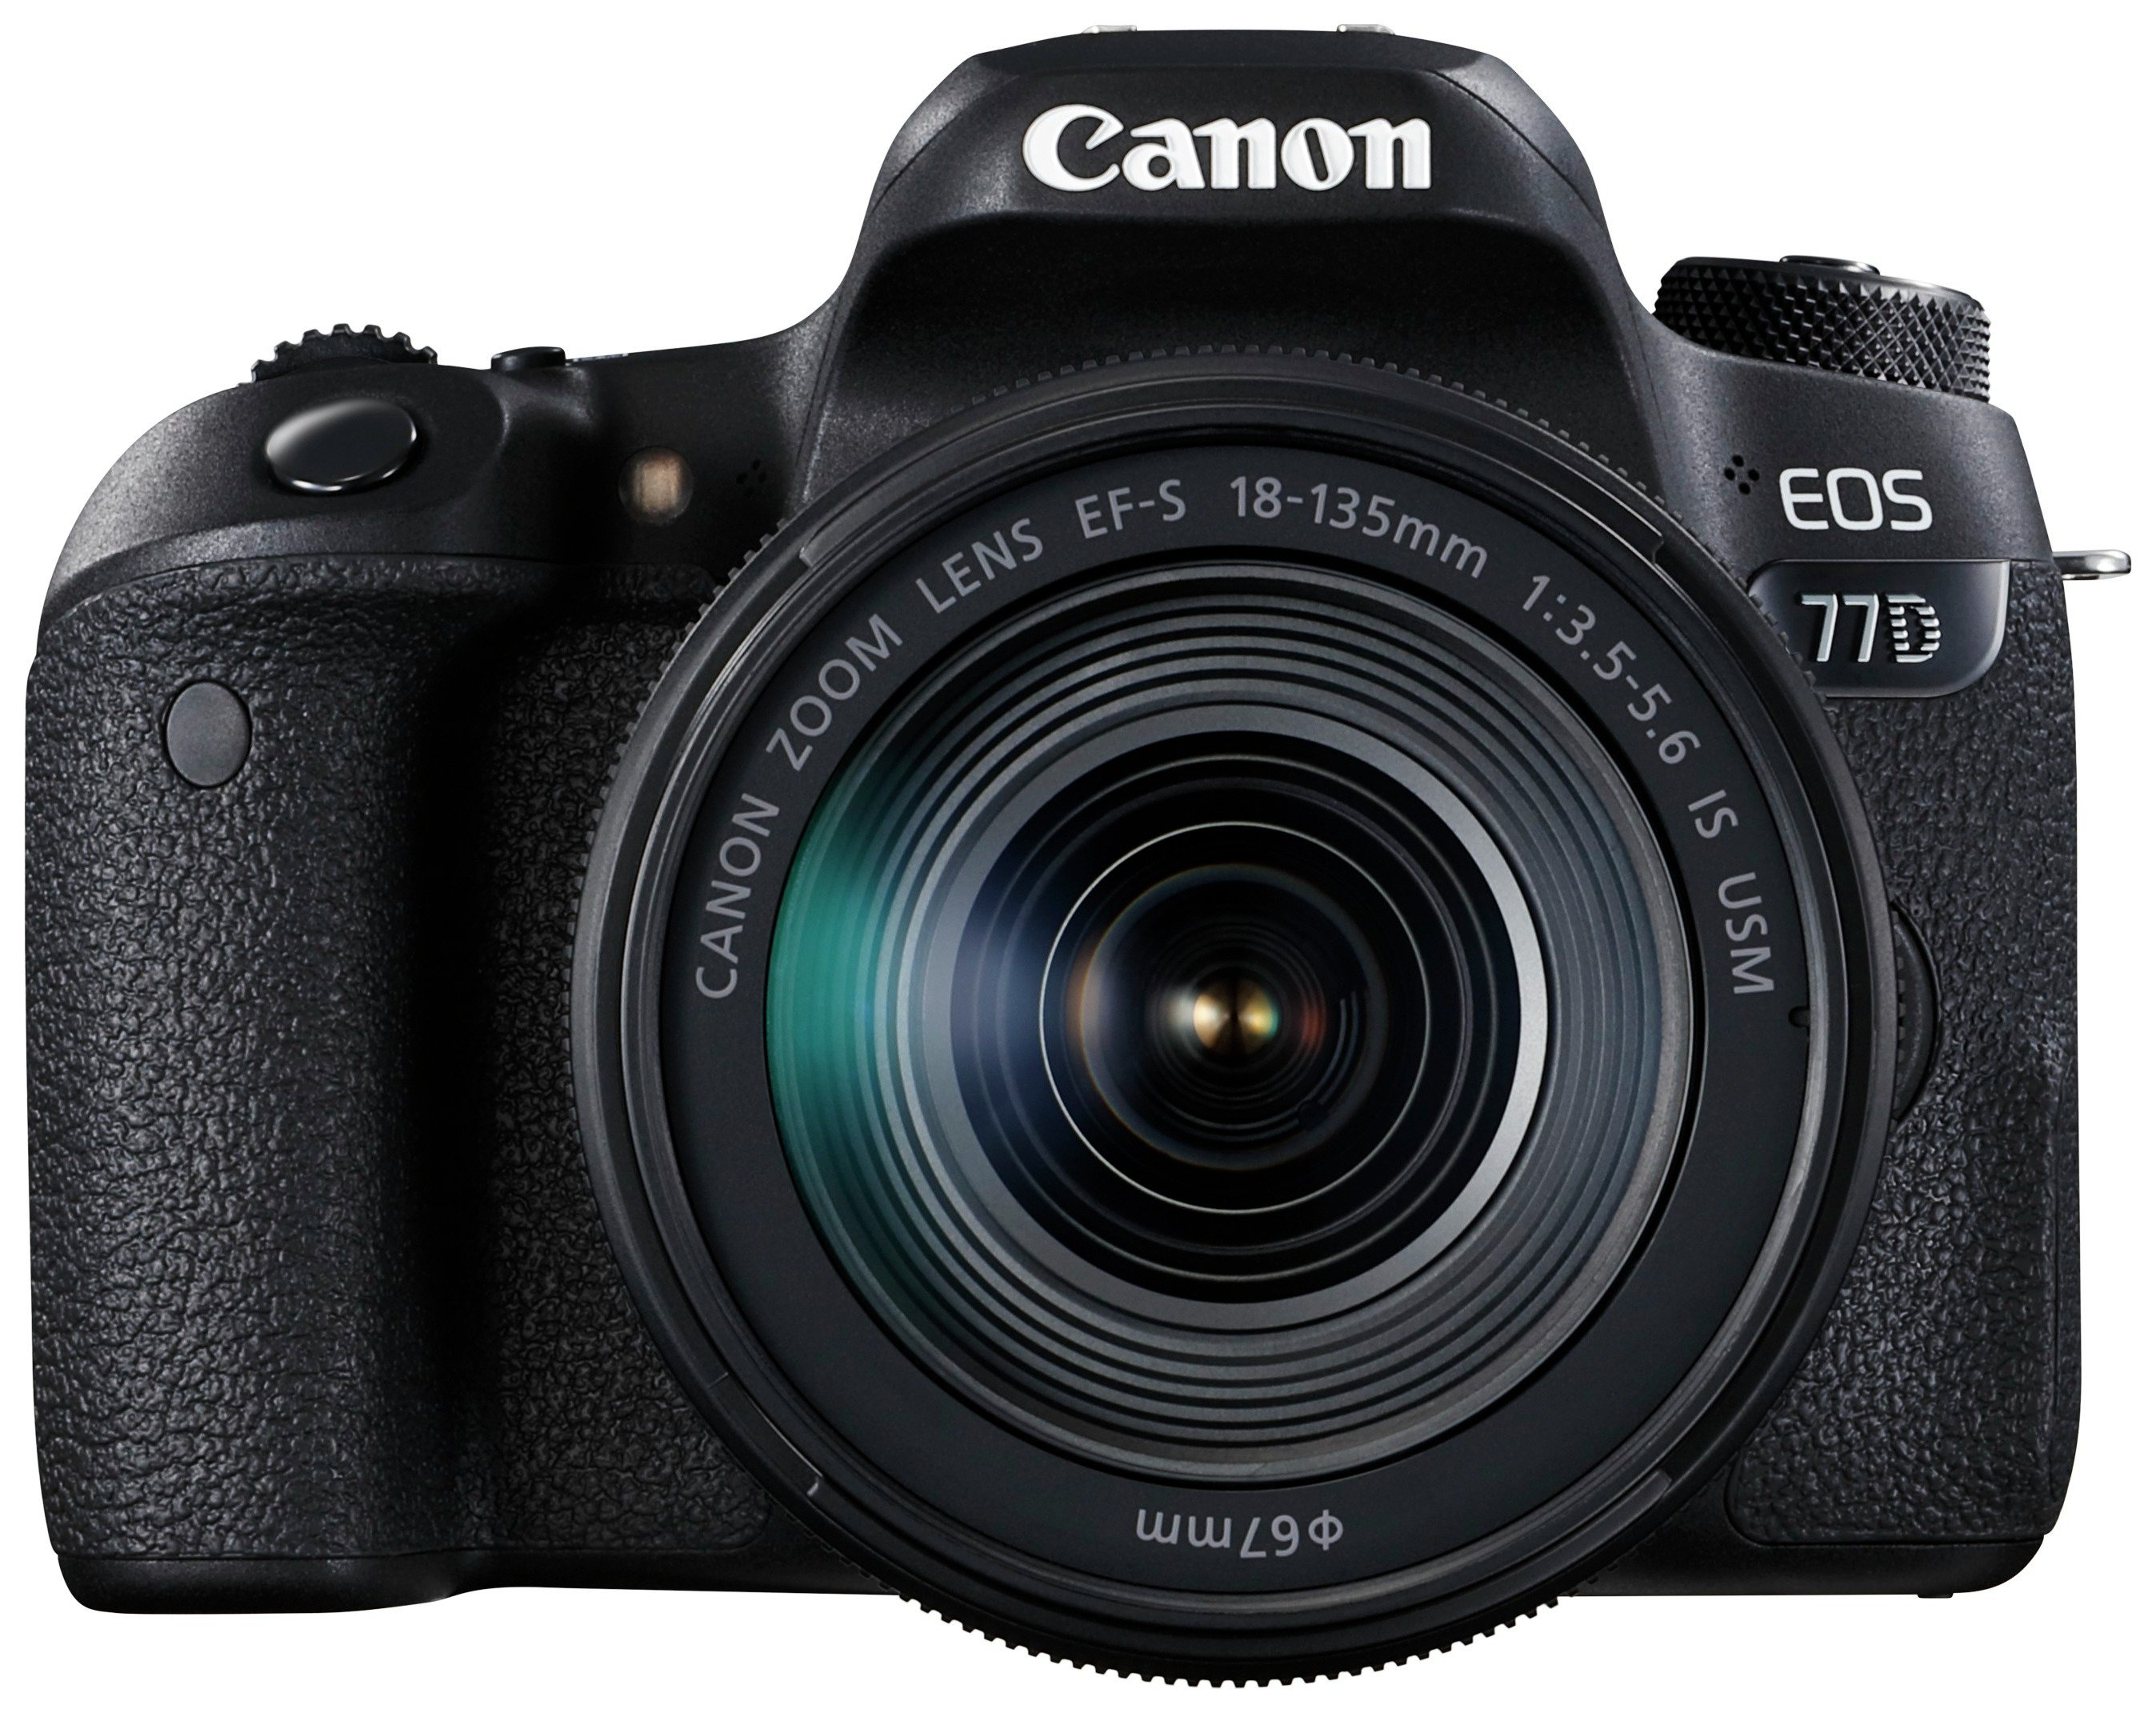 Canon EOS 77D DSLR Camera with 18-135mm IS USM Lens review